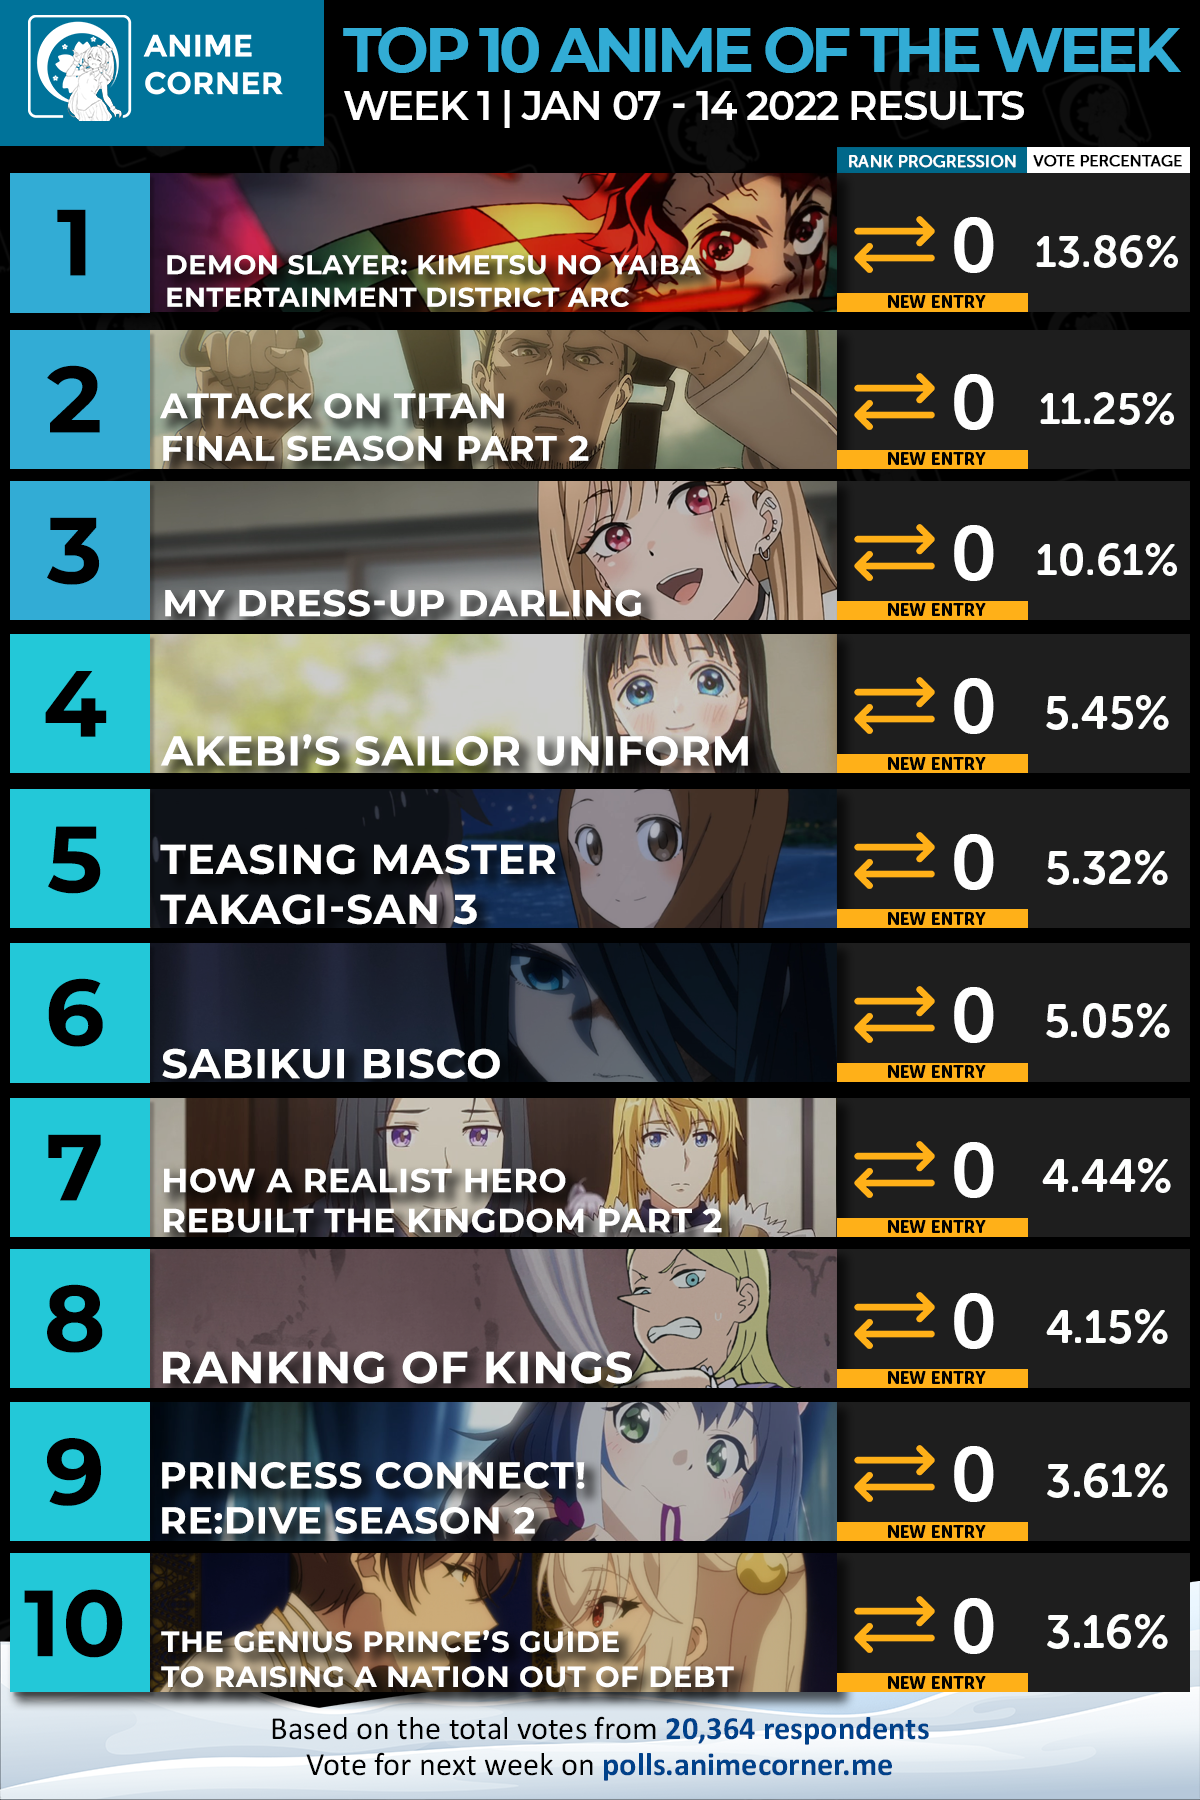 Demon Slayer Ranks 1st in Week 1 of Winter 2022 After an Incredible Episode  - Anime Corner